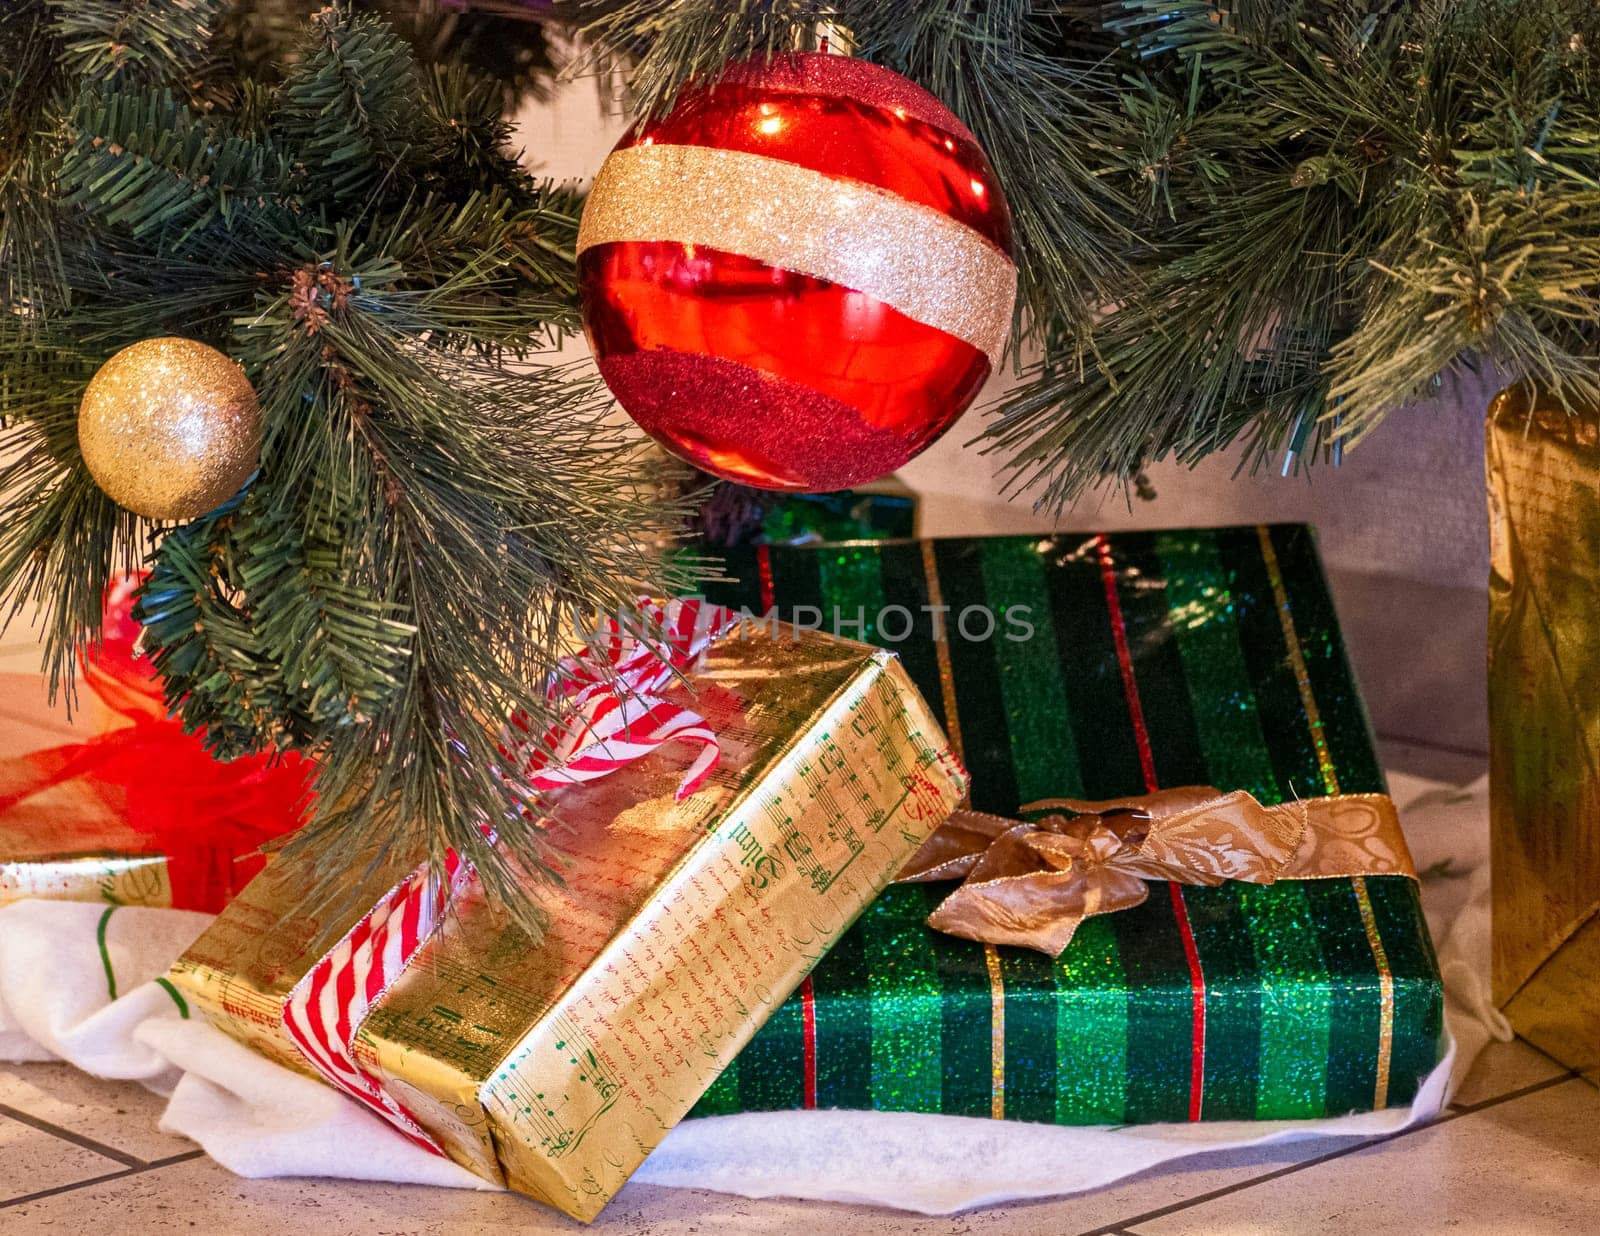 Decorative Santa Claus sleigh with colored gifts boxes under christmas tree